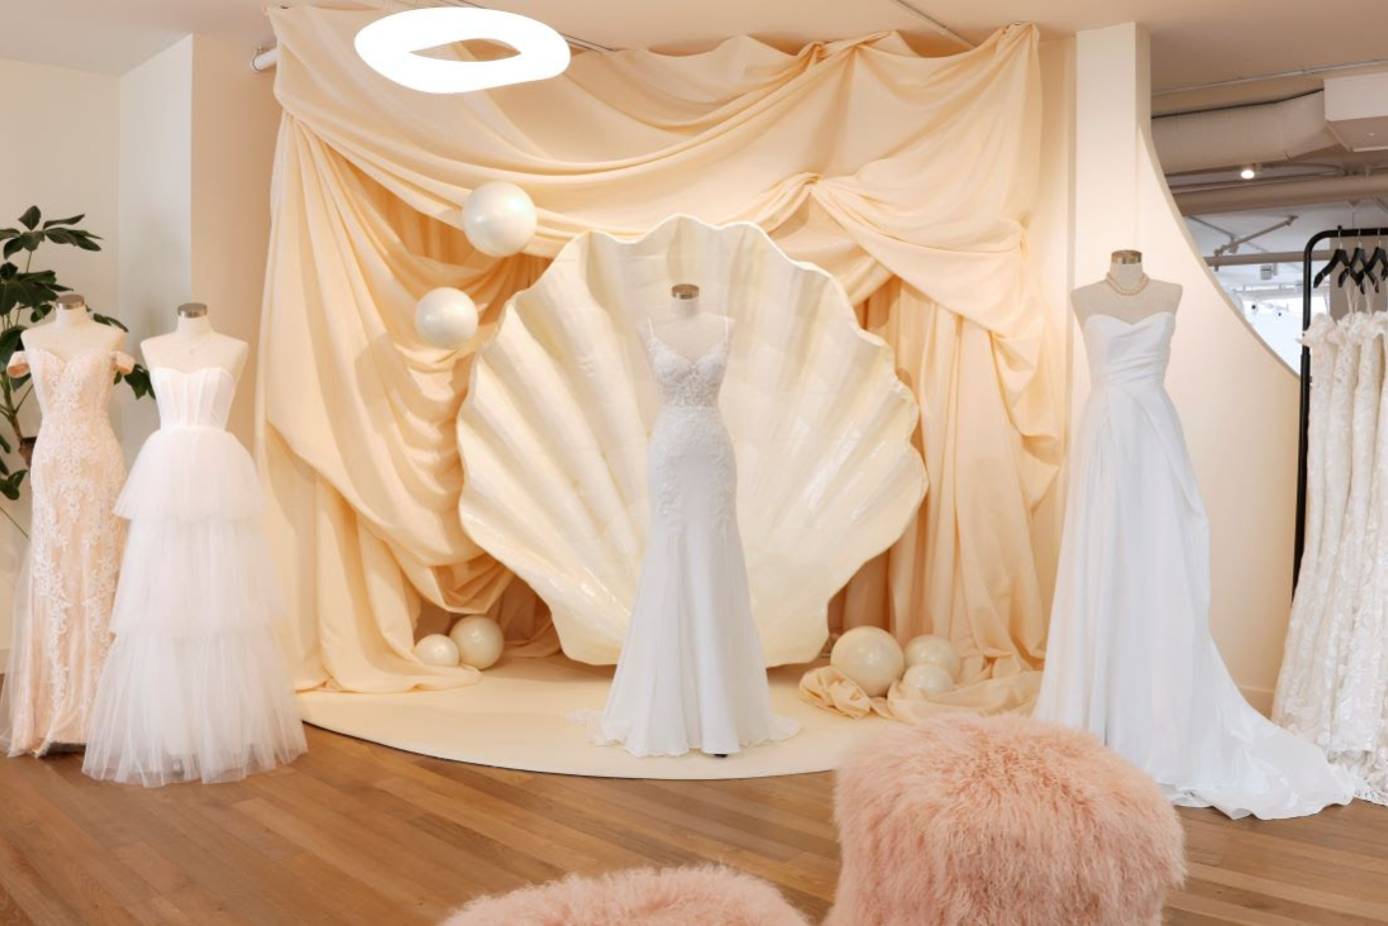 New bridal store  The Bridal Rack opens in Anderson